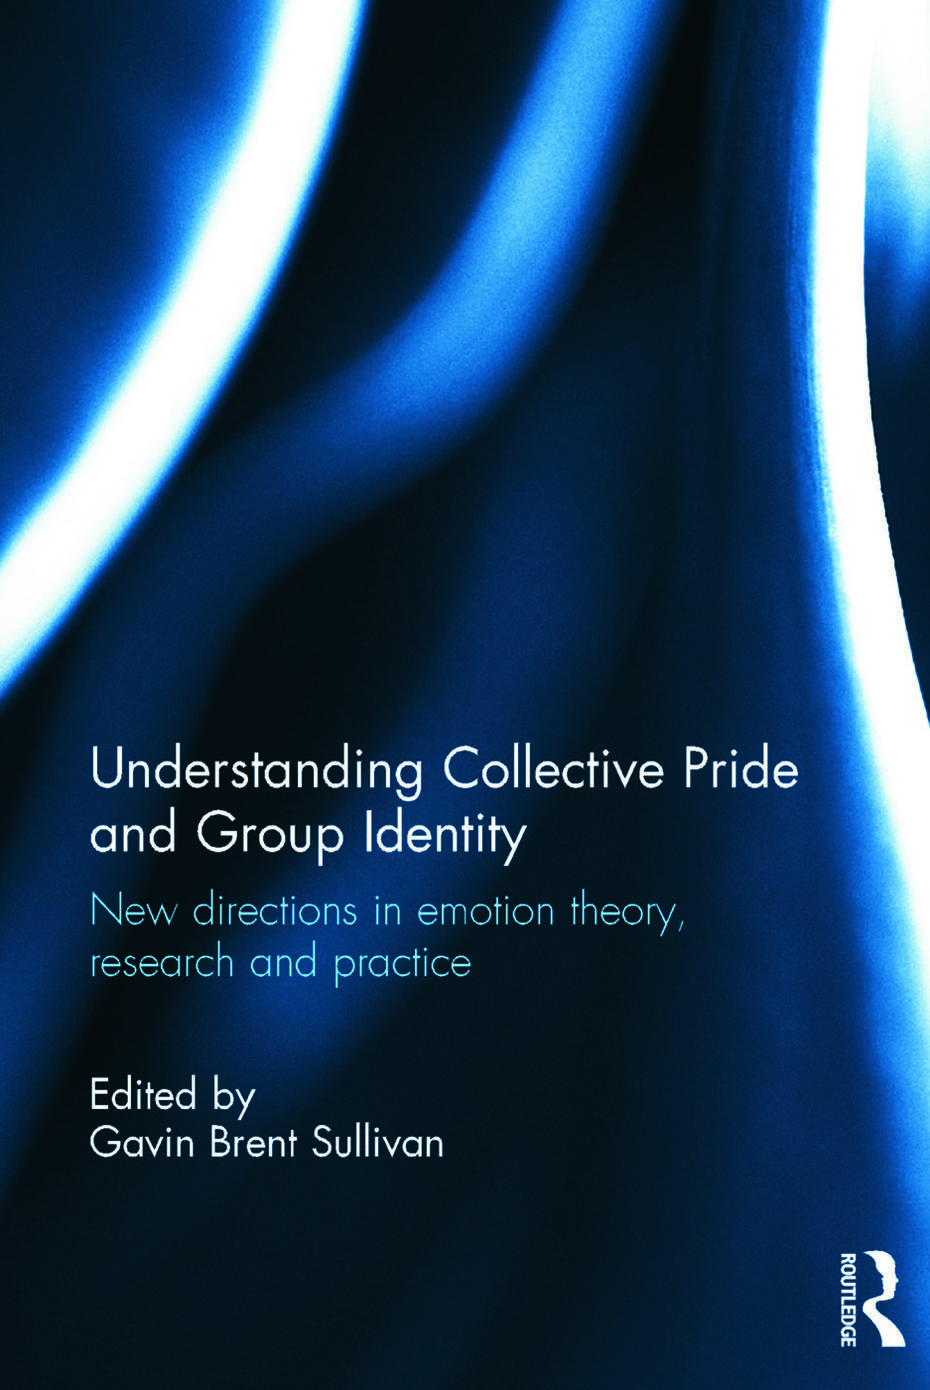 Understanding Collective Pride and Group Identity (Cover)